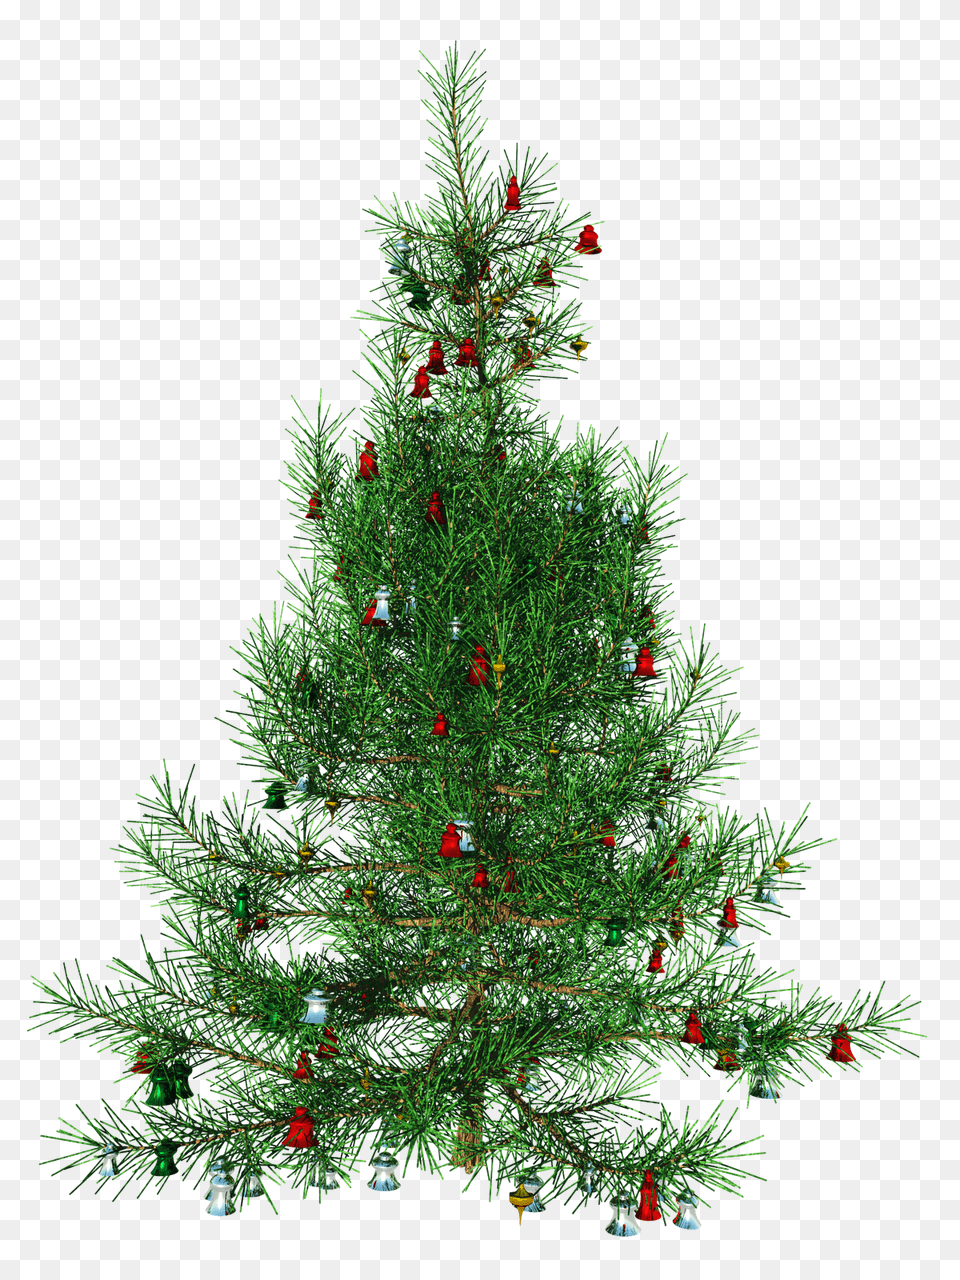 Christmas Tree Transparent Background Transparent Background Xmas Tree, Plant, Conifer, Pine, Christmas Decorations Free Png